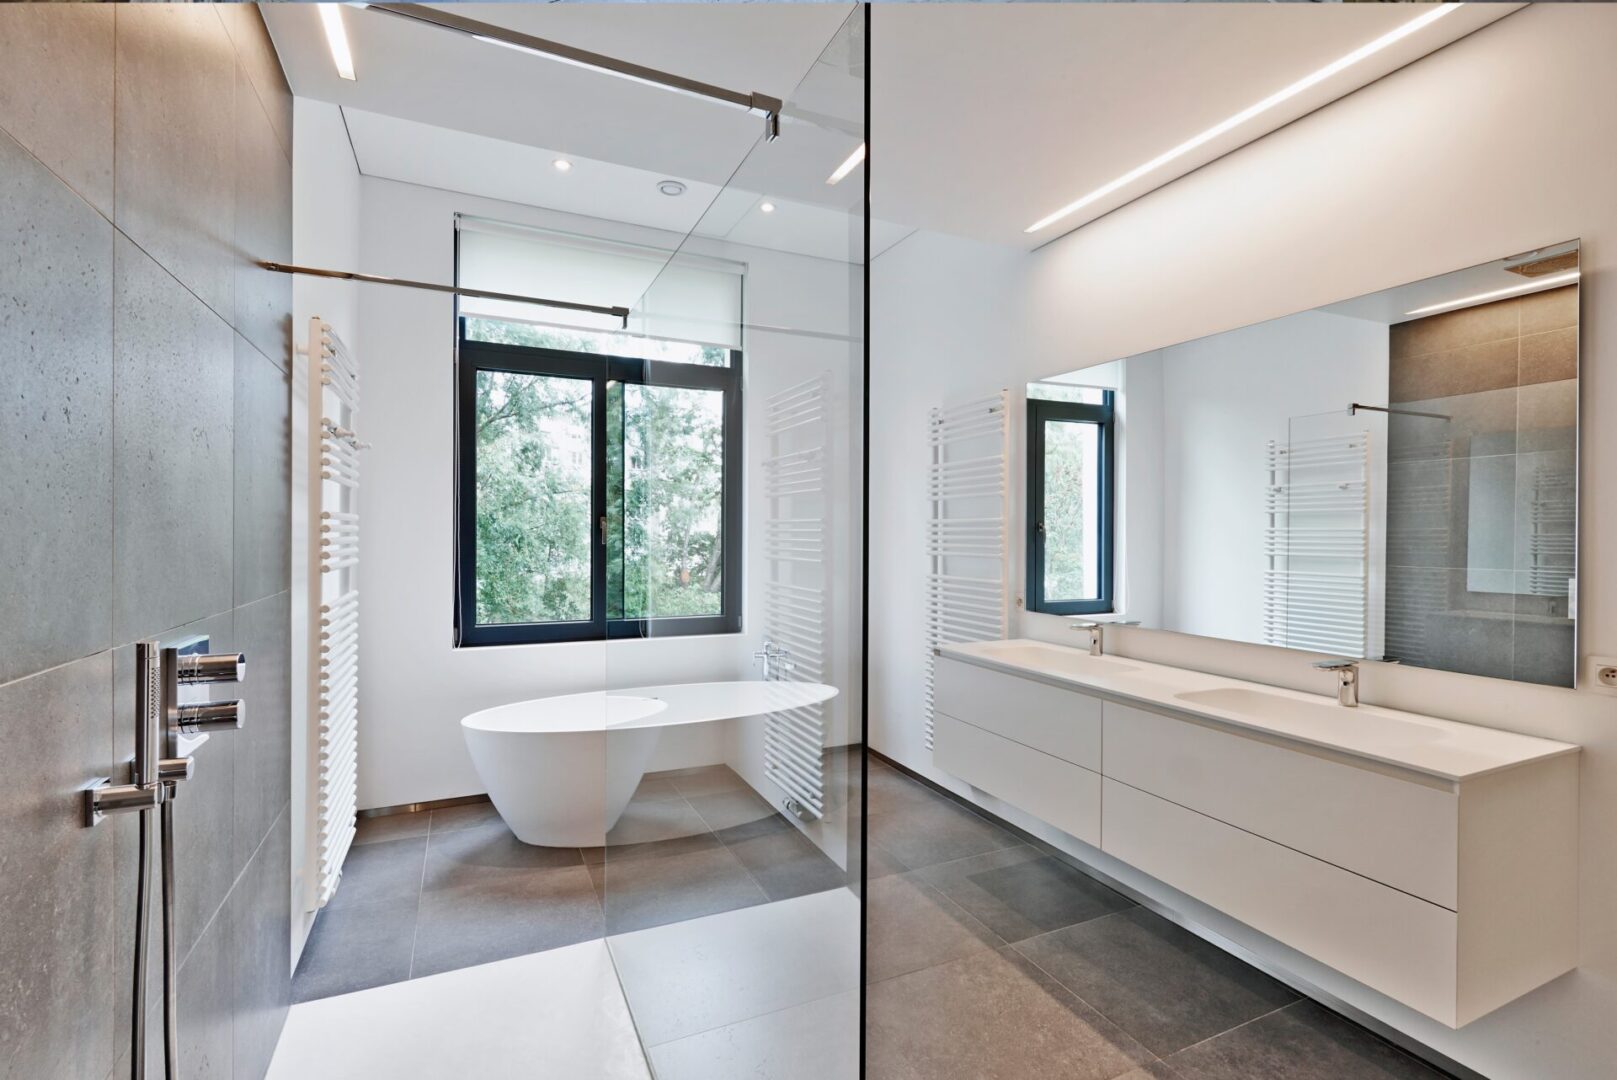 Renovation,Of,A,Bathroom,Before,And,After,In,Vertical,Format